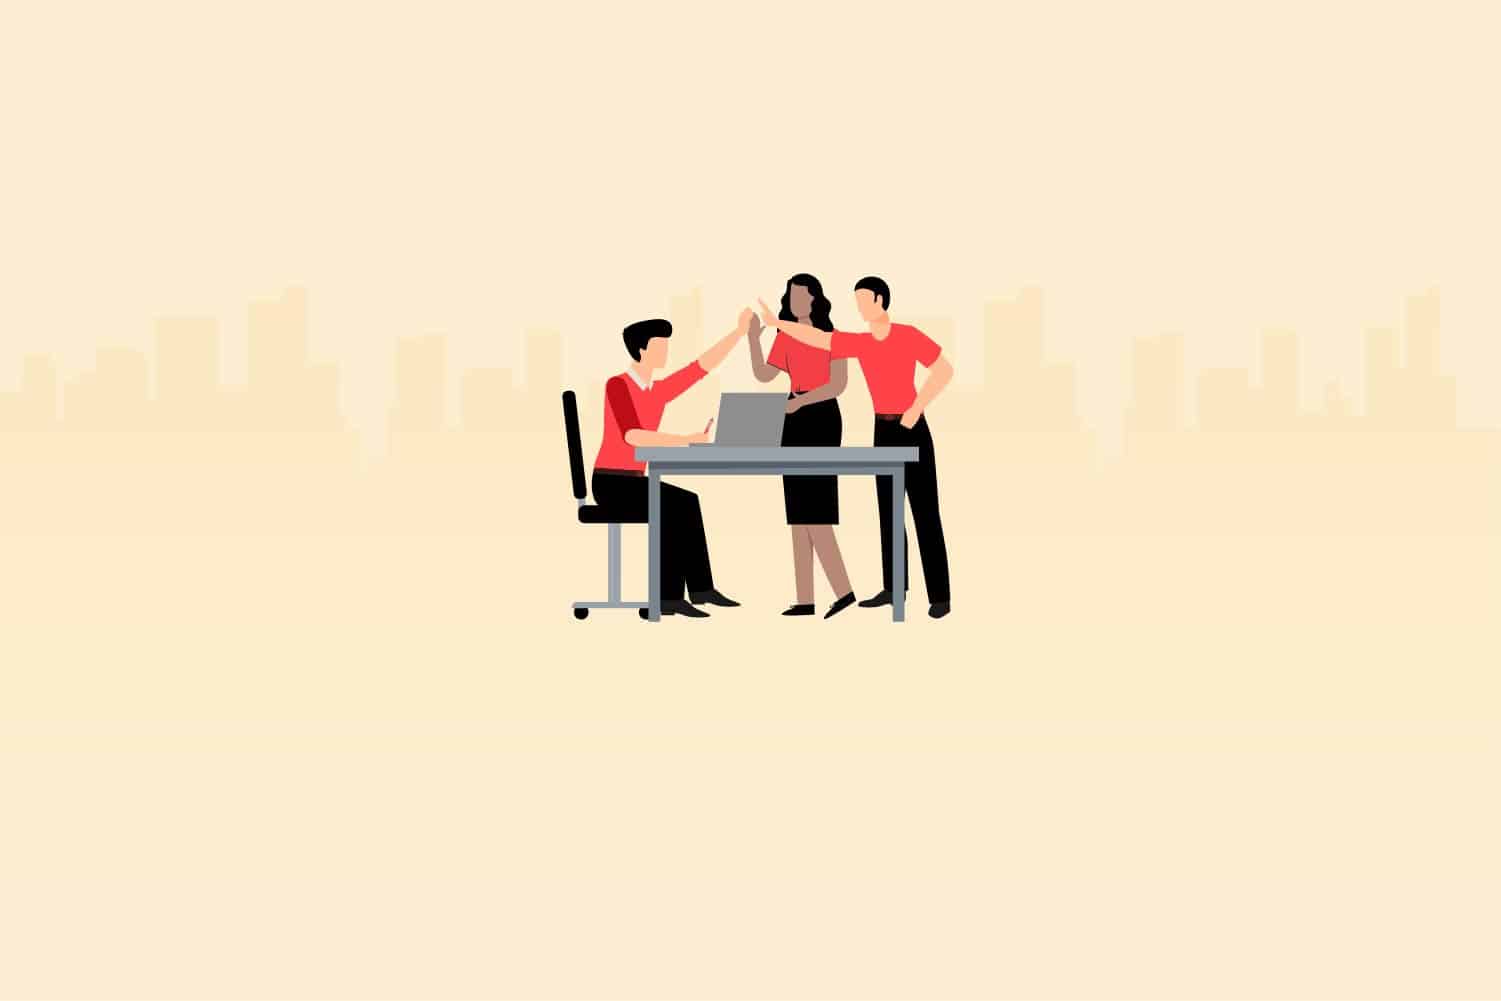 How to create a workplace where employees thrive?